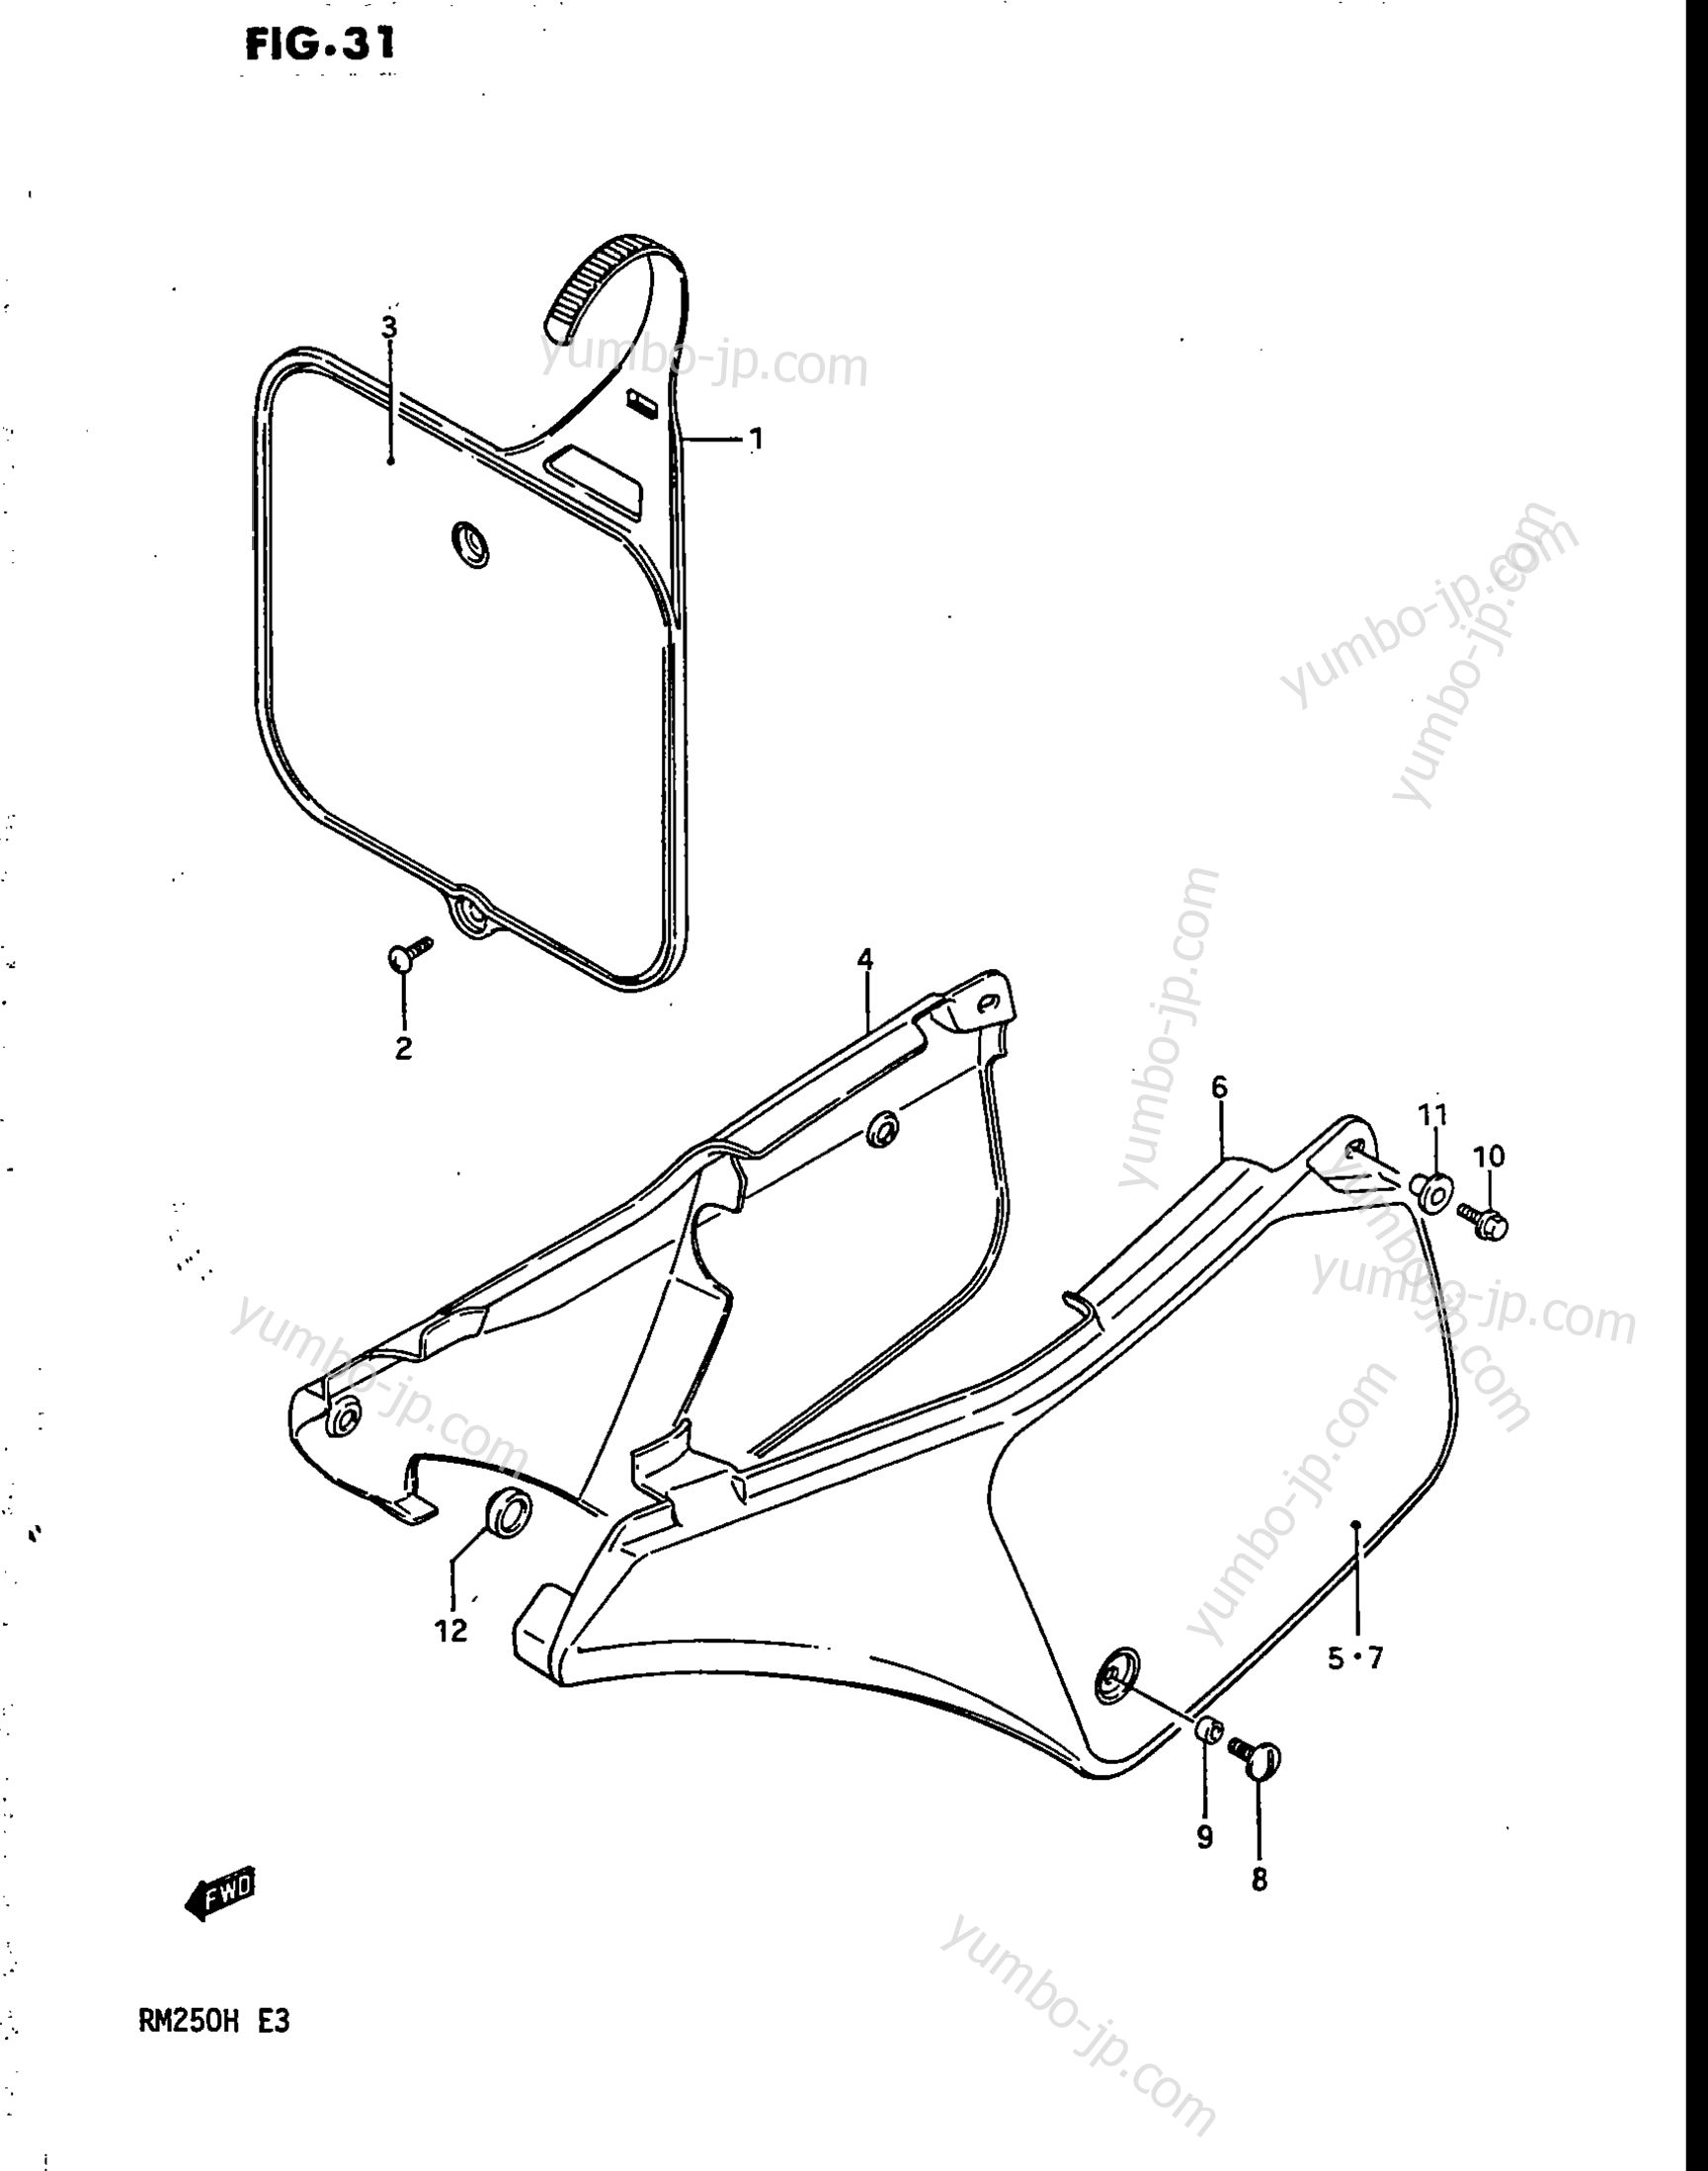 FRAME COVER for motorcycles SUZUKI RM250 1987 year